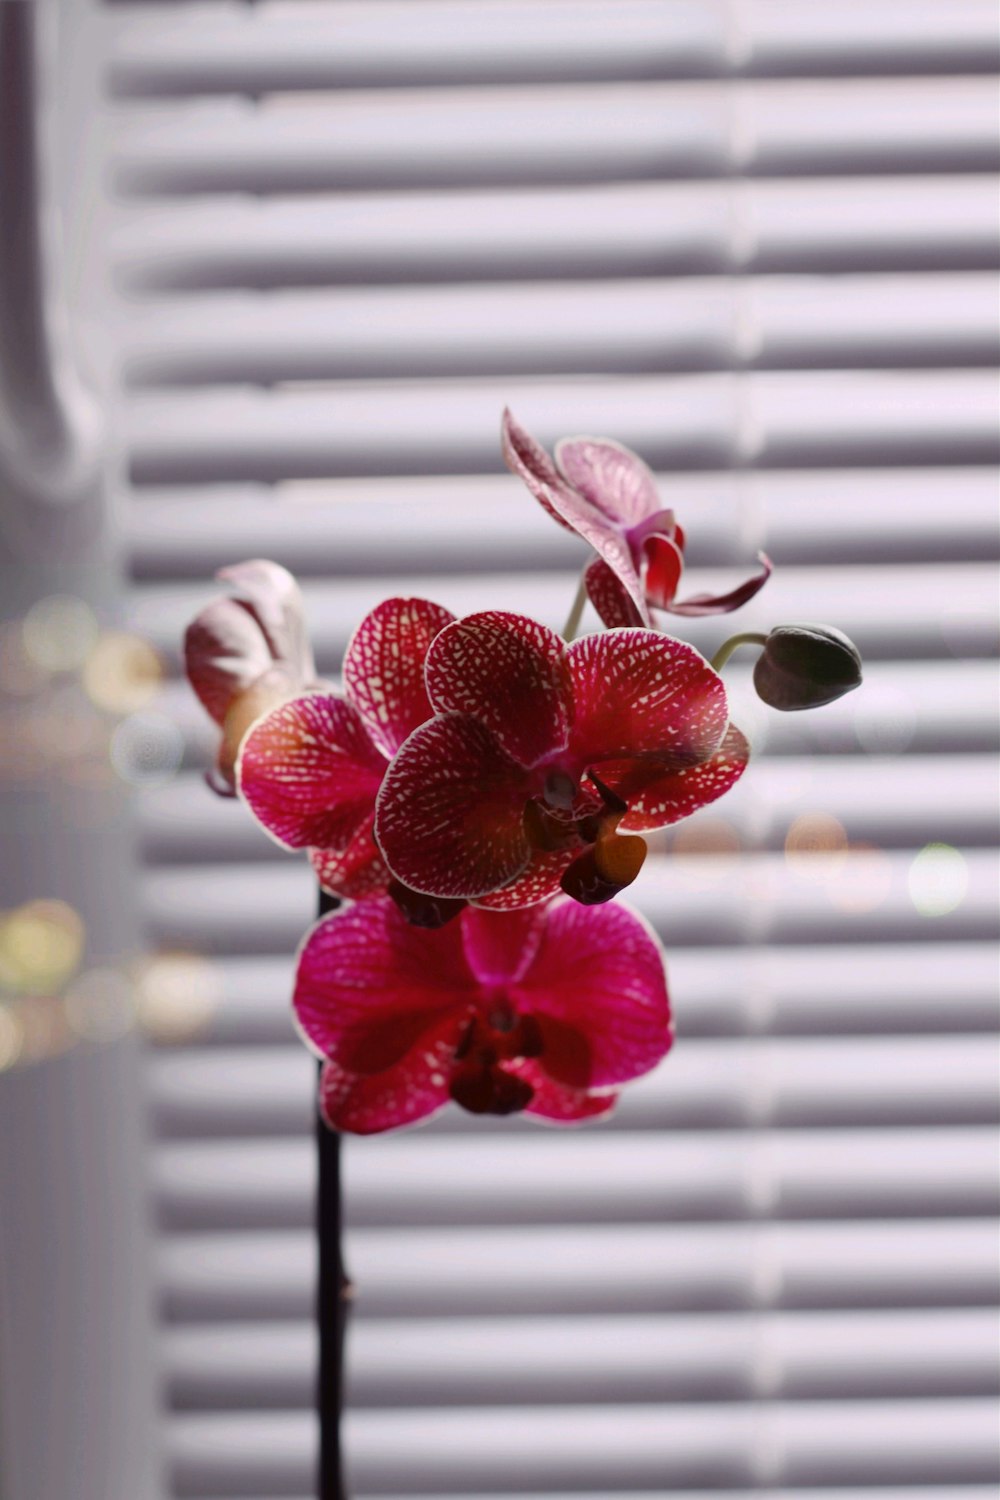 red flower in front of white window blinds